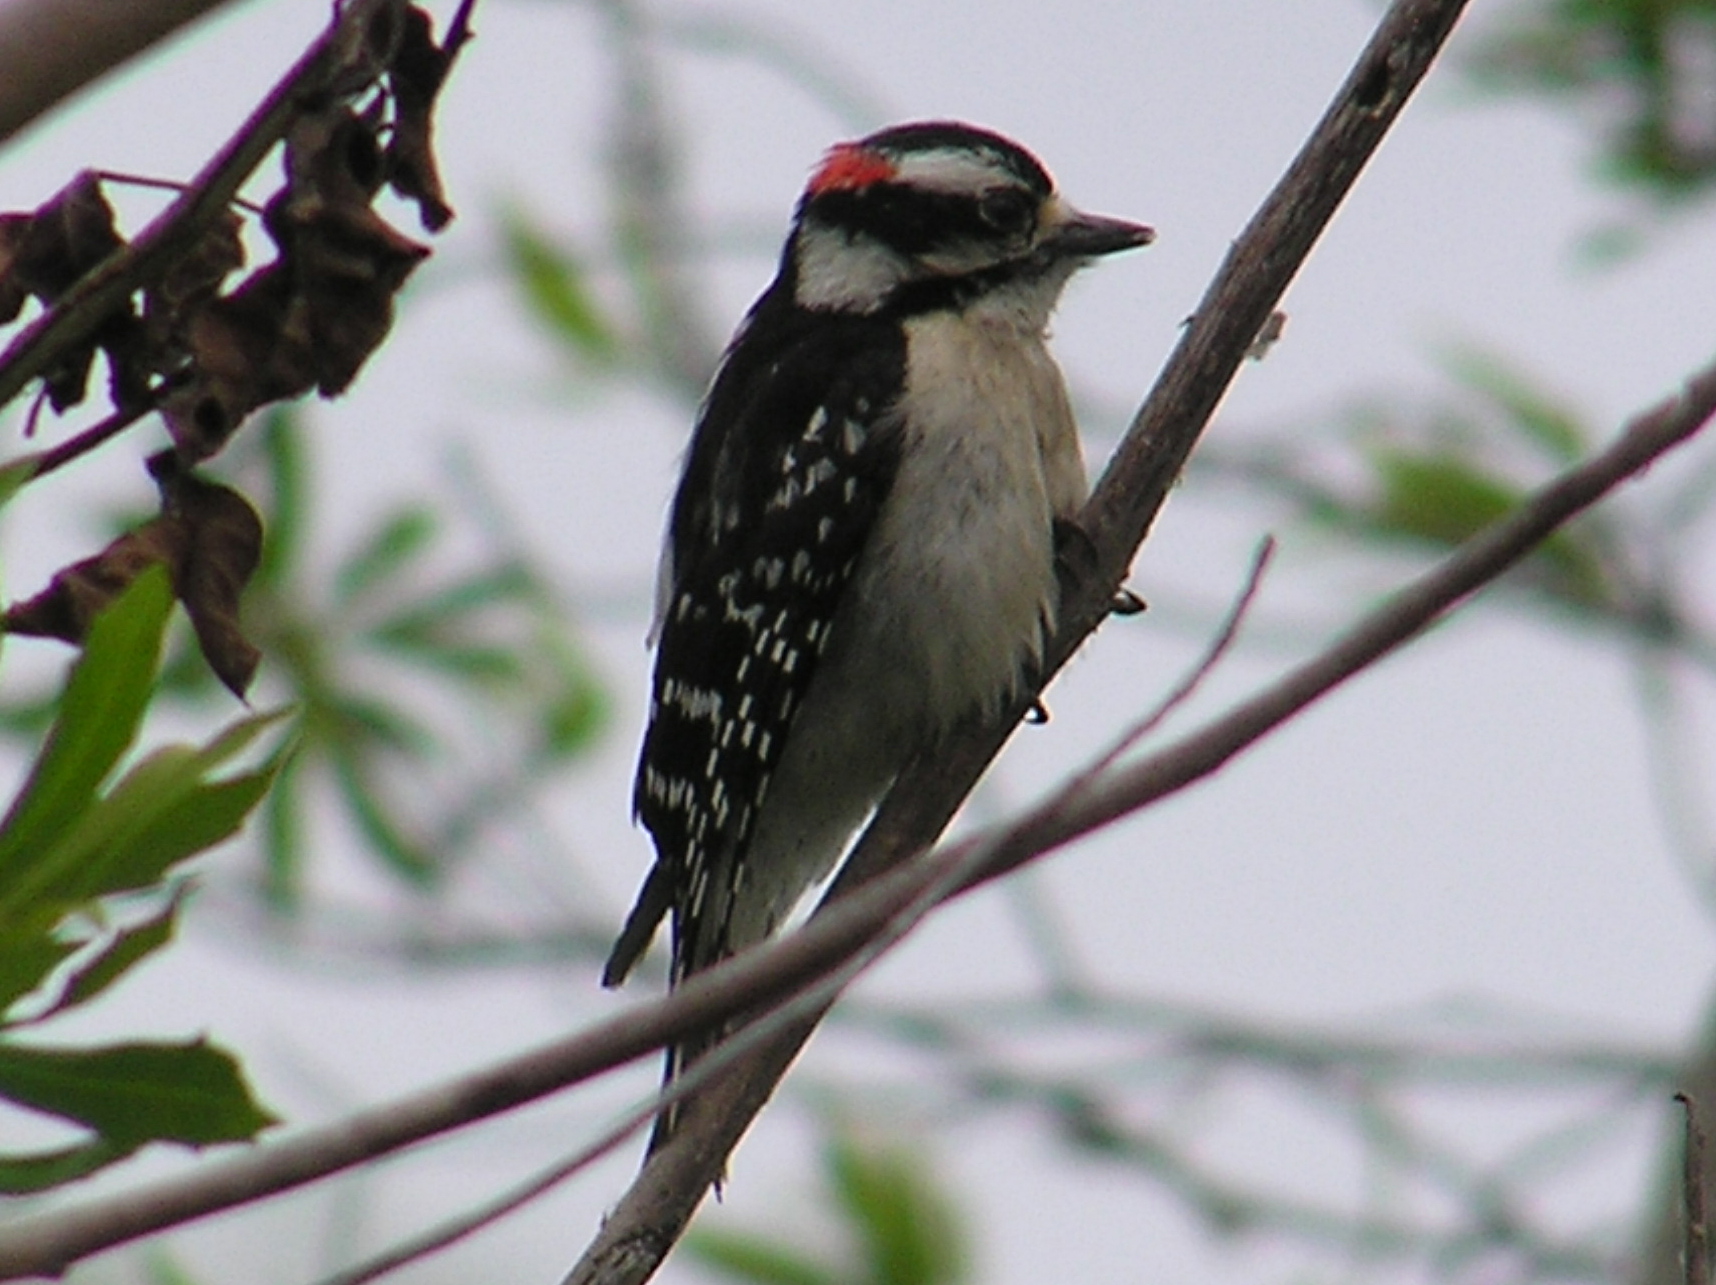 Click picture to see more Downy Woodpeckers.